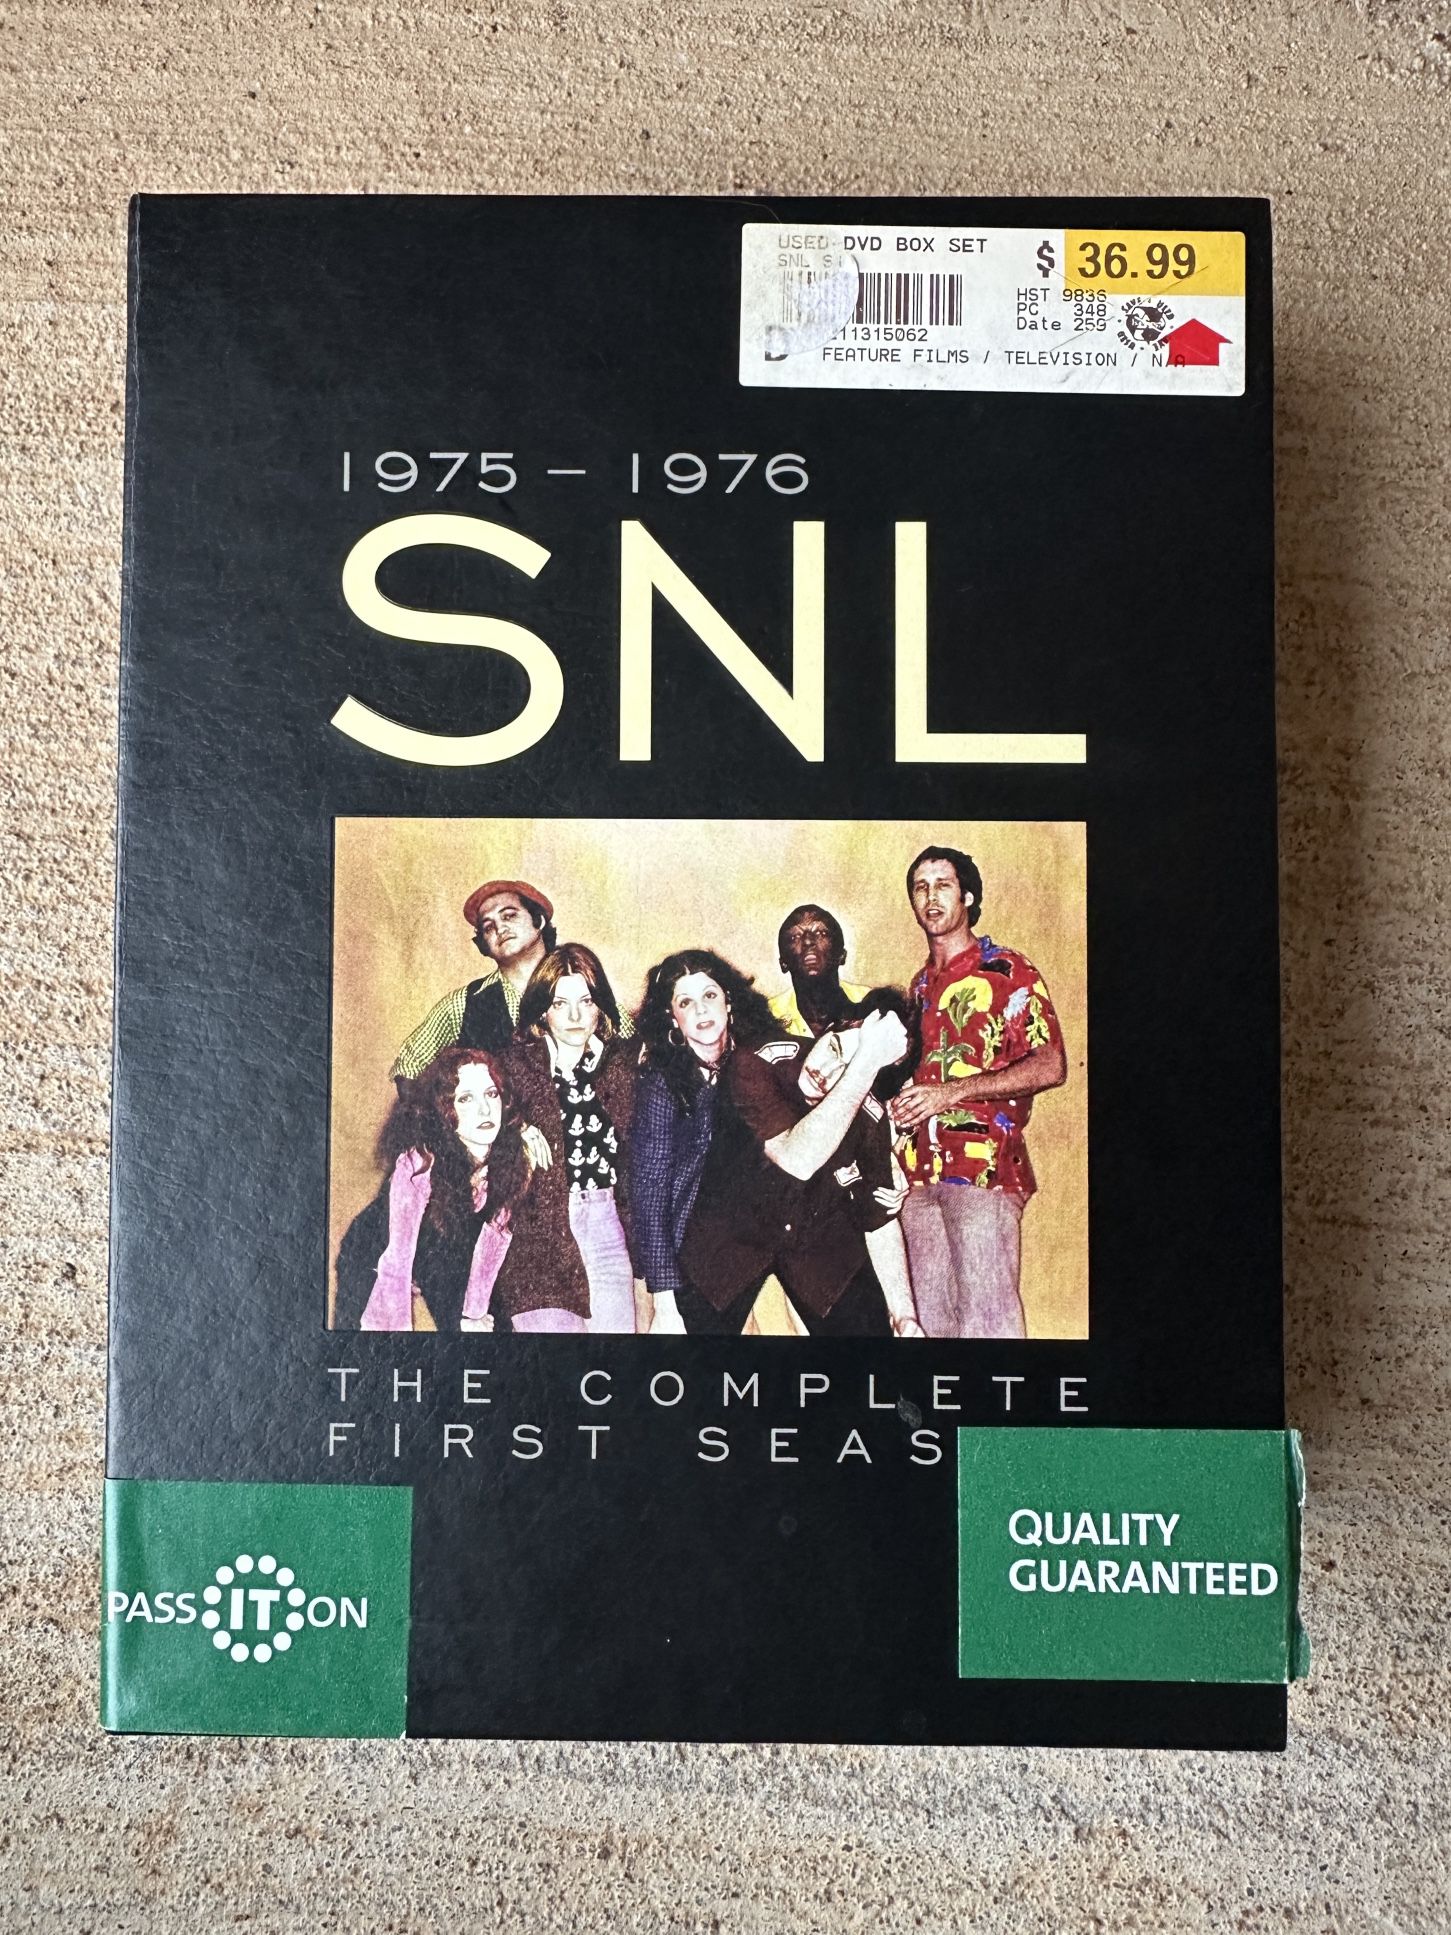 Saturday Night Live SNL The Complete First Season DVD 8 Disc Set 1(contact info removed) 